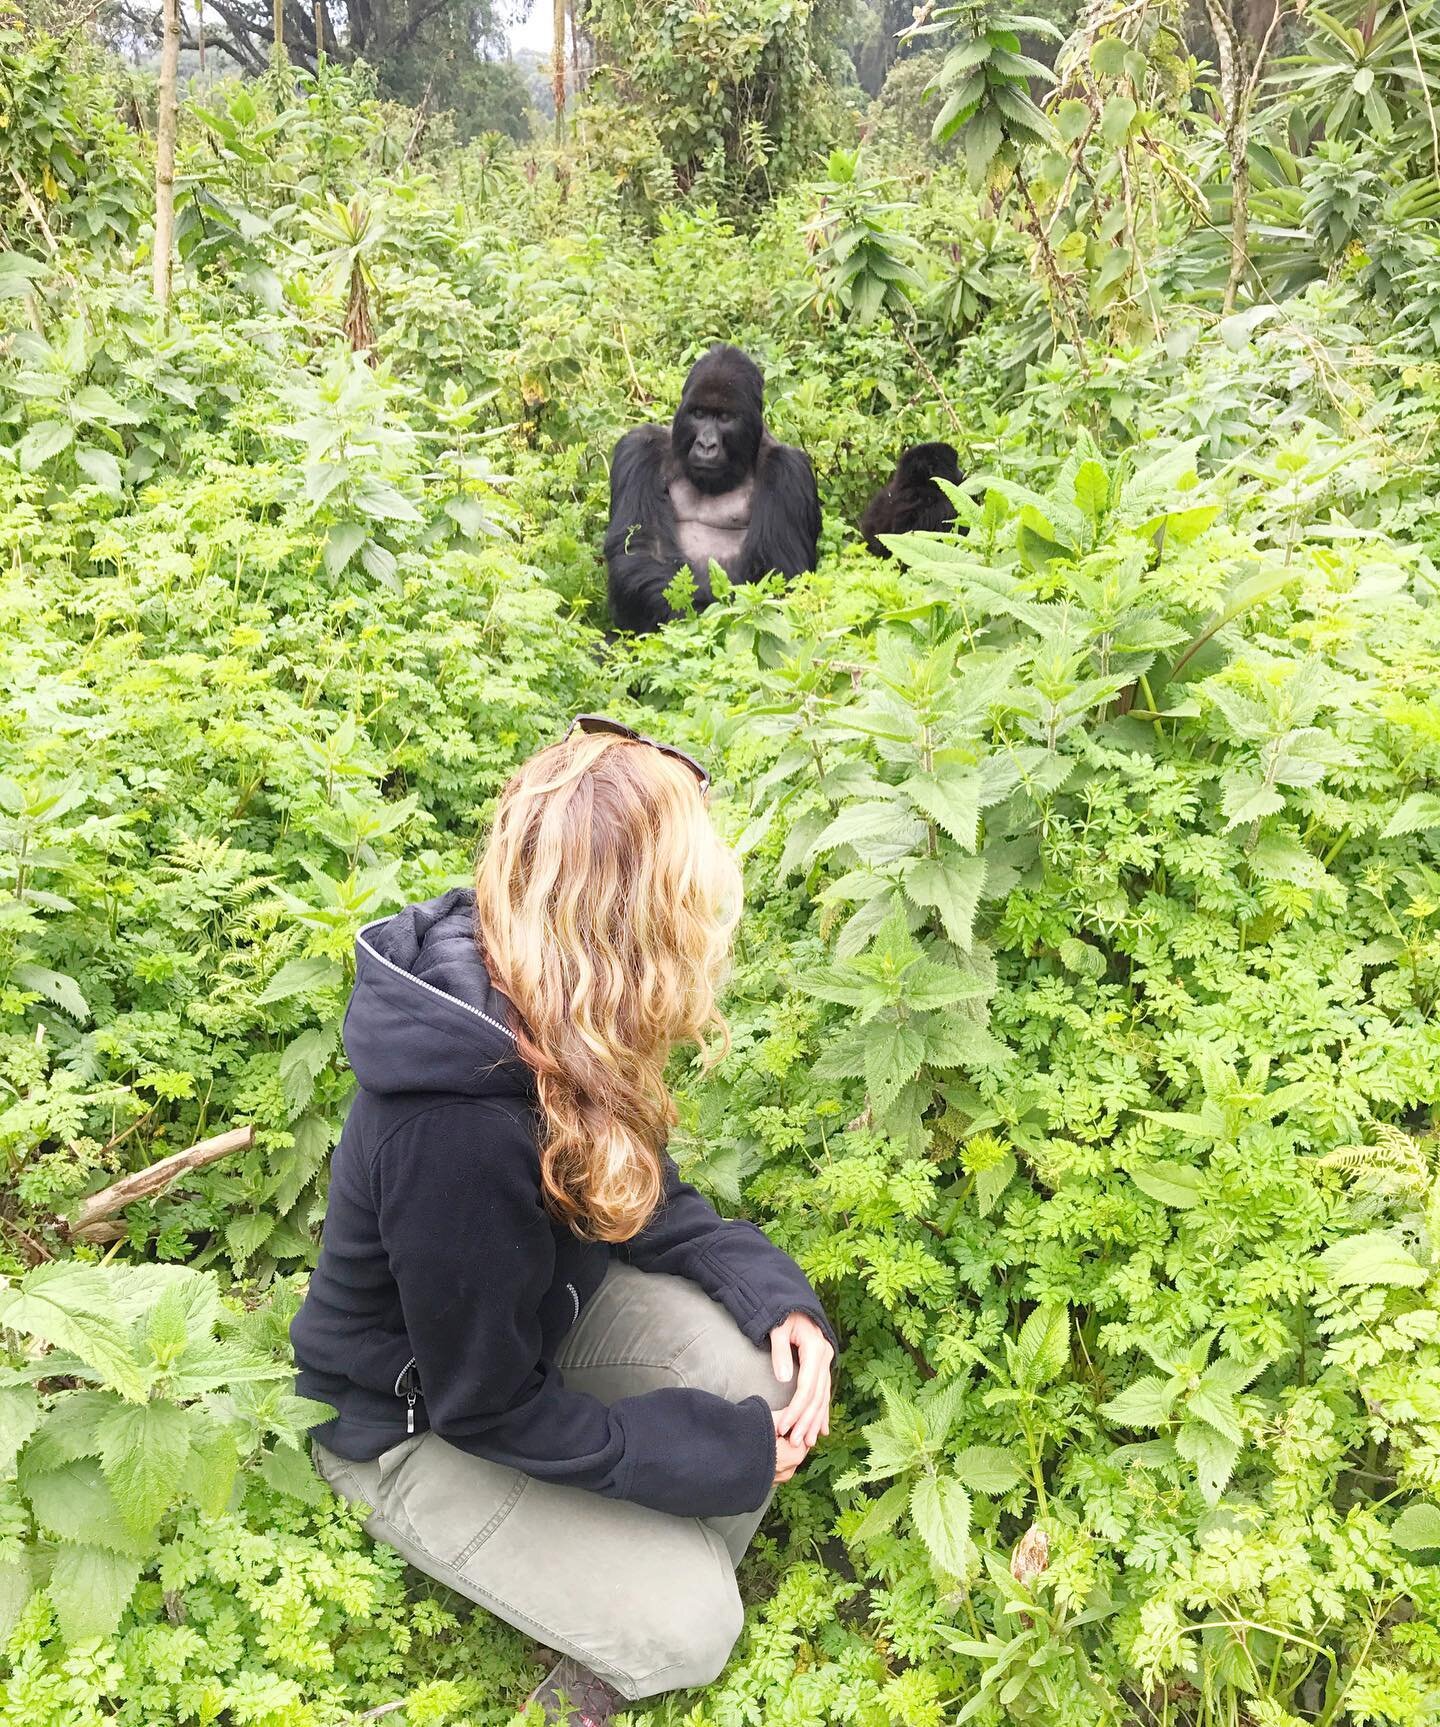 Seeing gorillas for the first time in the wild in Uganda and Rwanda was one of the most incredible experiences of my life. When I was a little girl I dreamed of studying gorillas and other primates and one of my heroes was Jane Goodall. The more peop